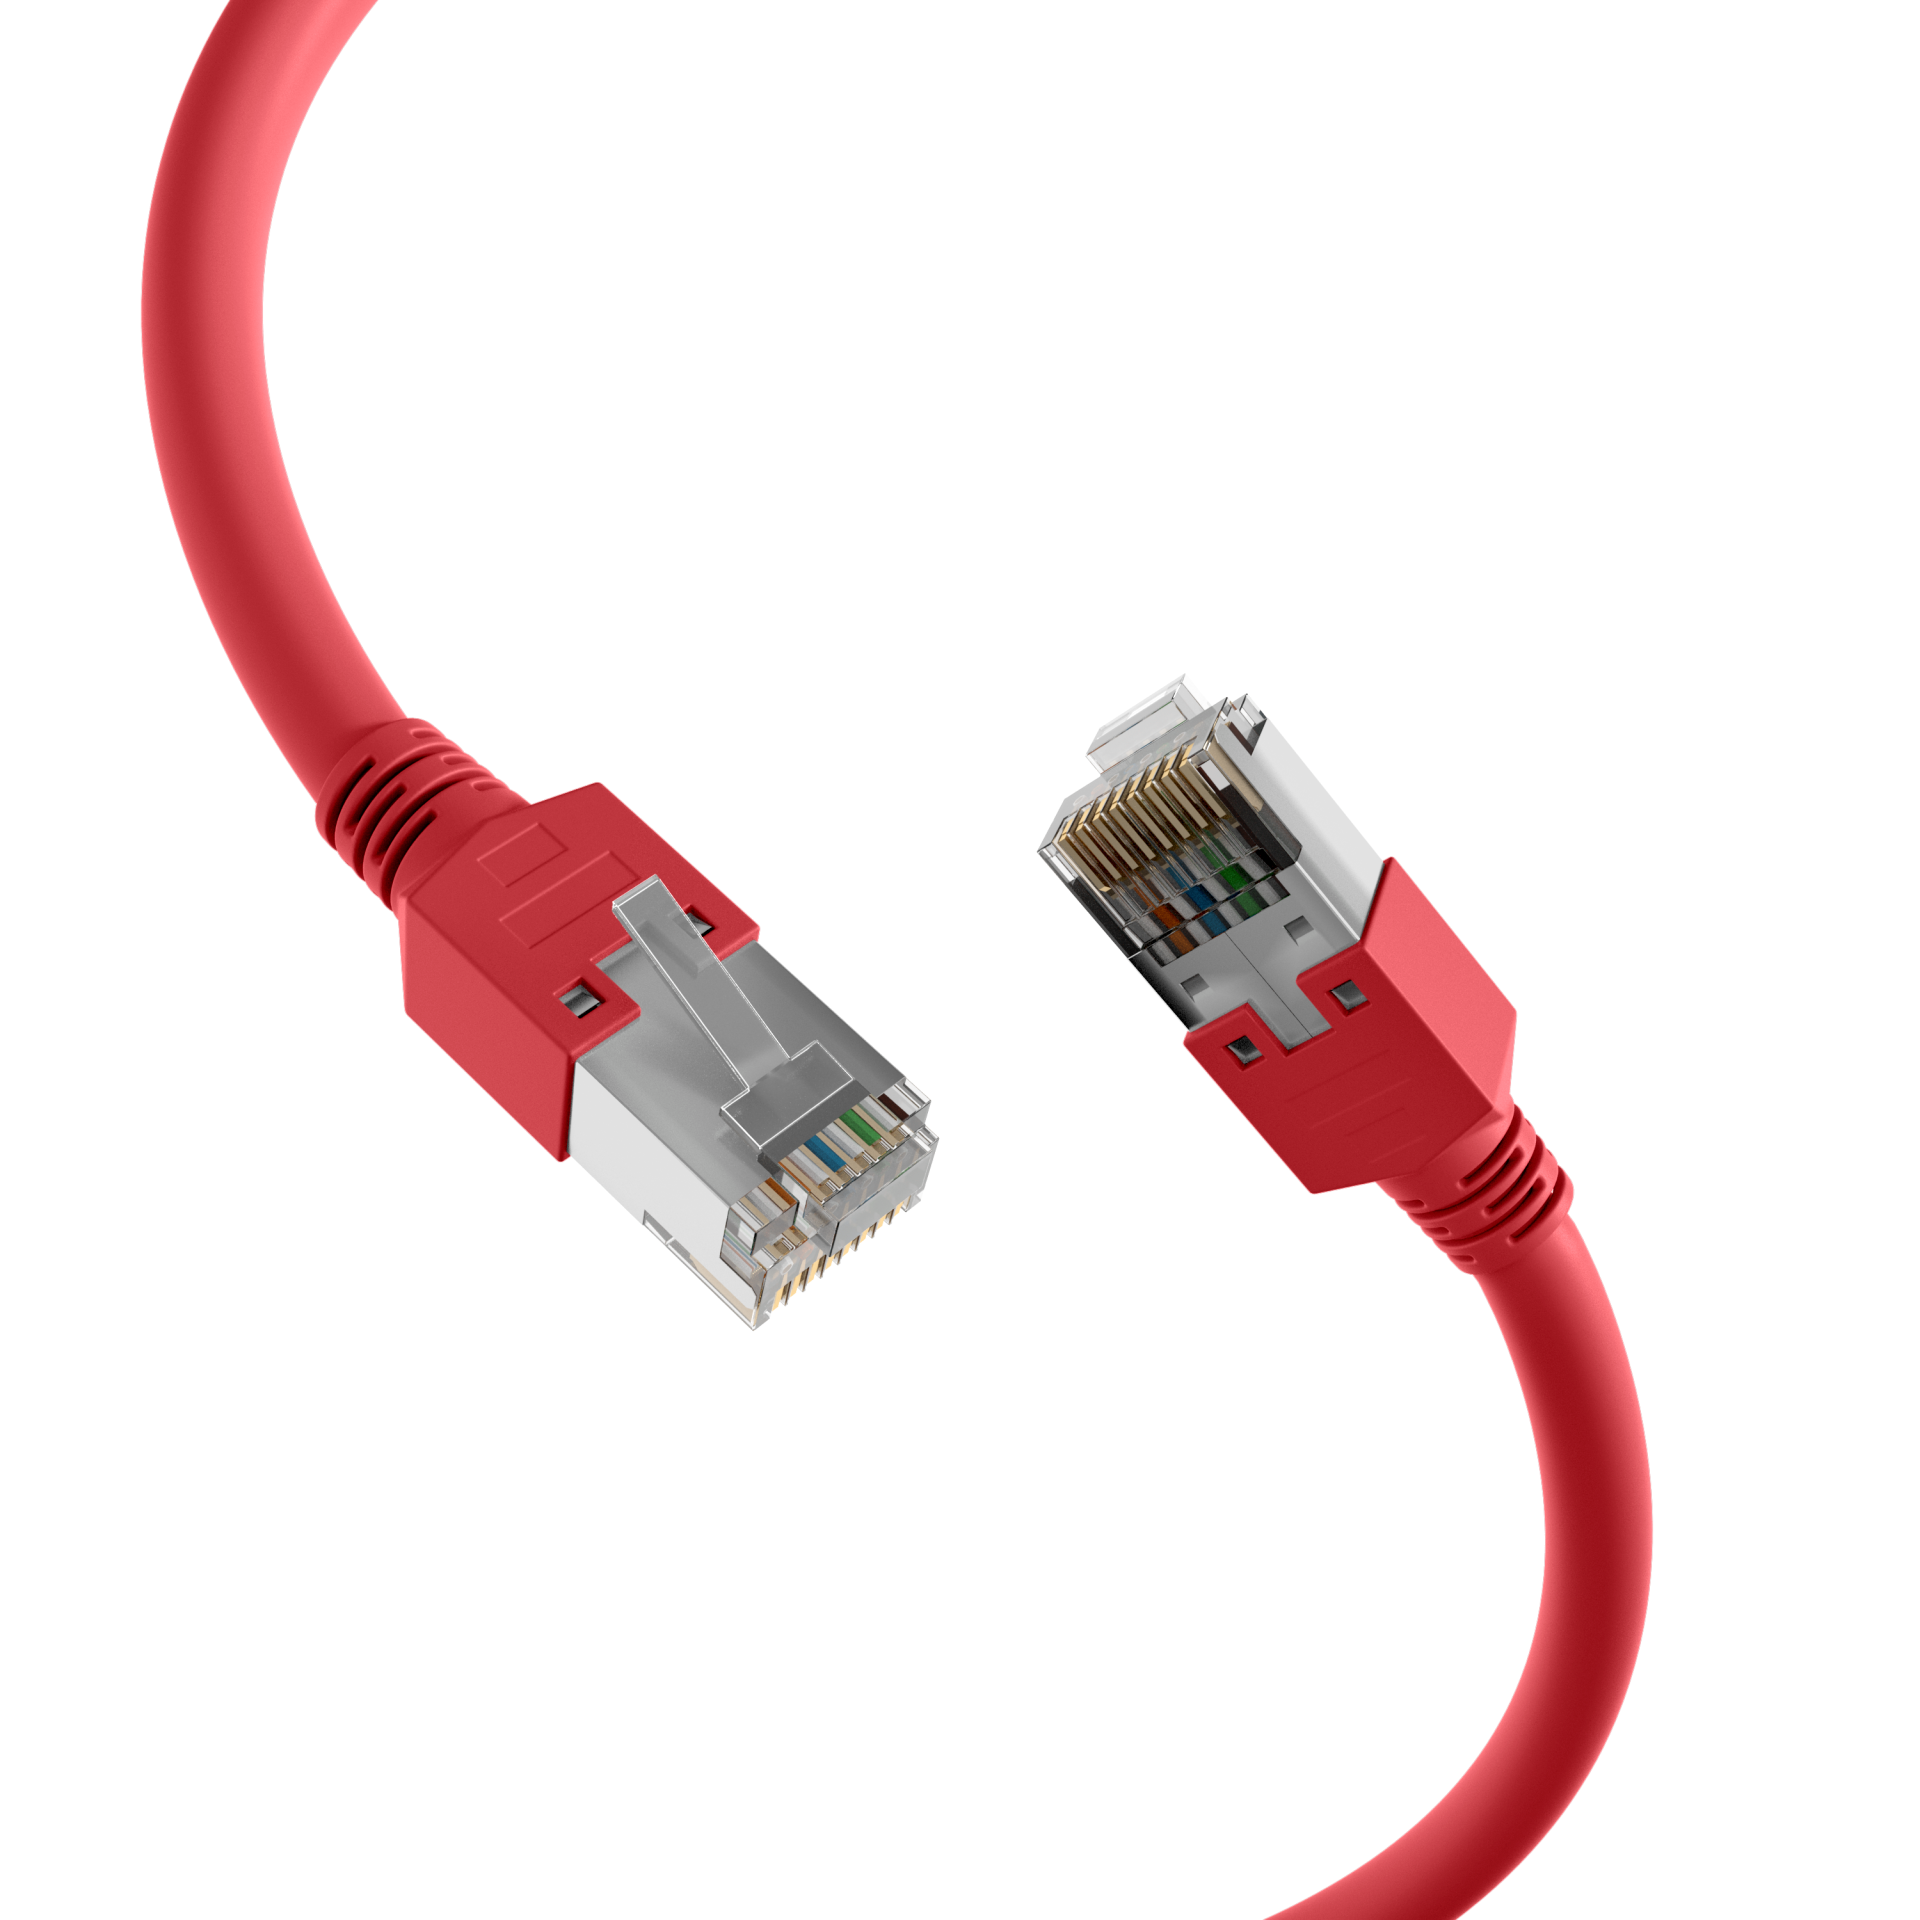 RJ45 Patch Cord Cat.5e S/UTP PVCDätwyler 5502 TM11 red 1,5m